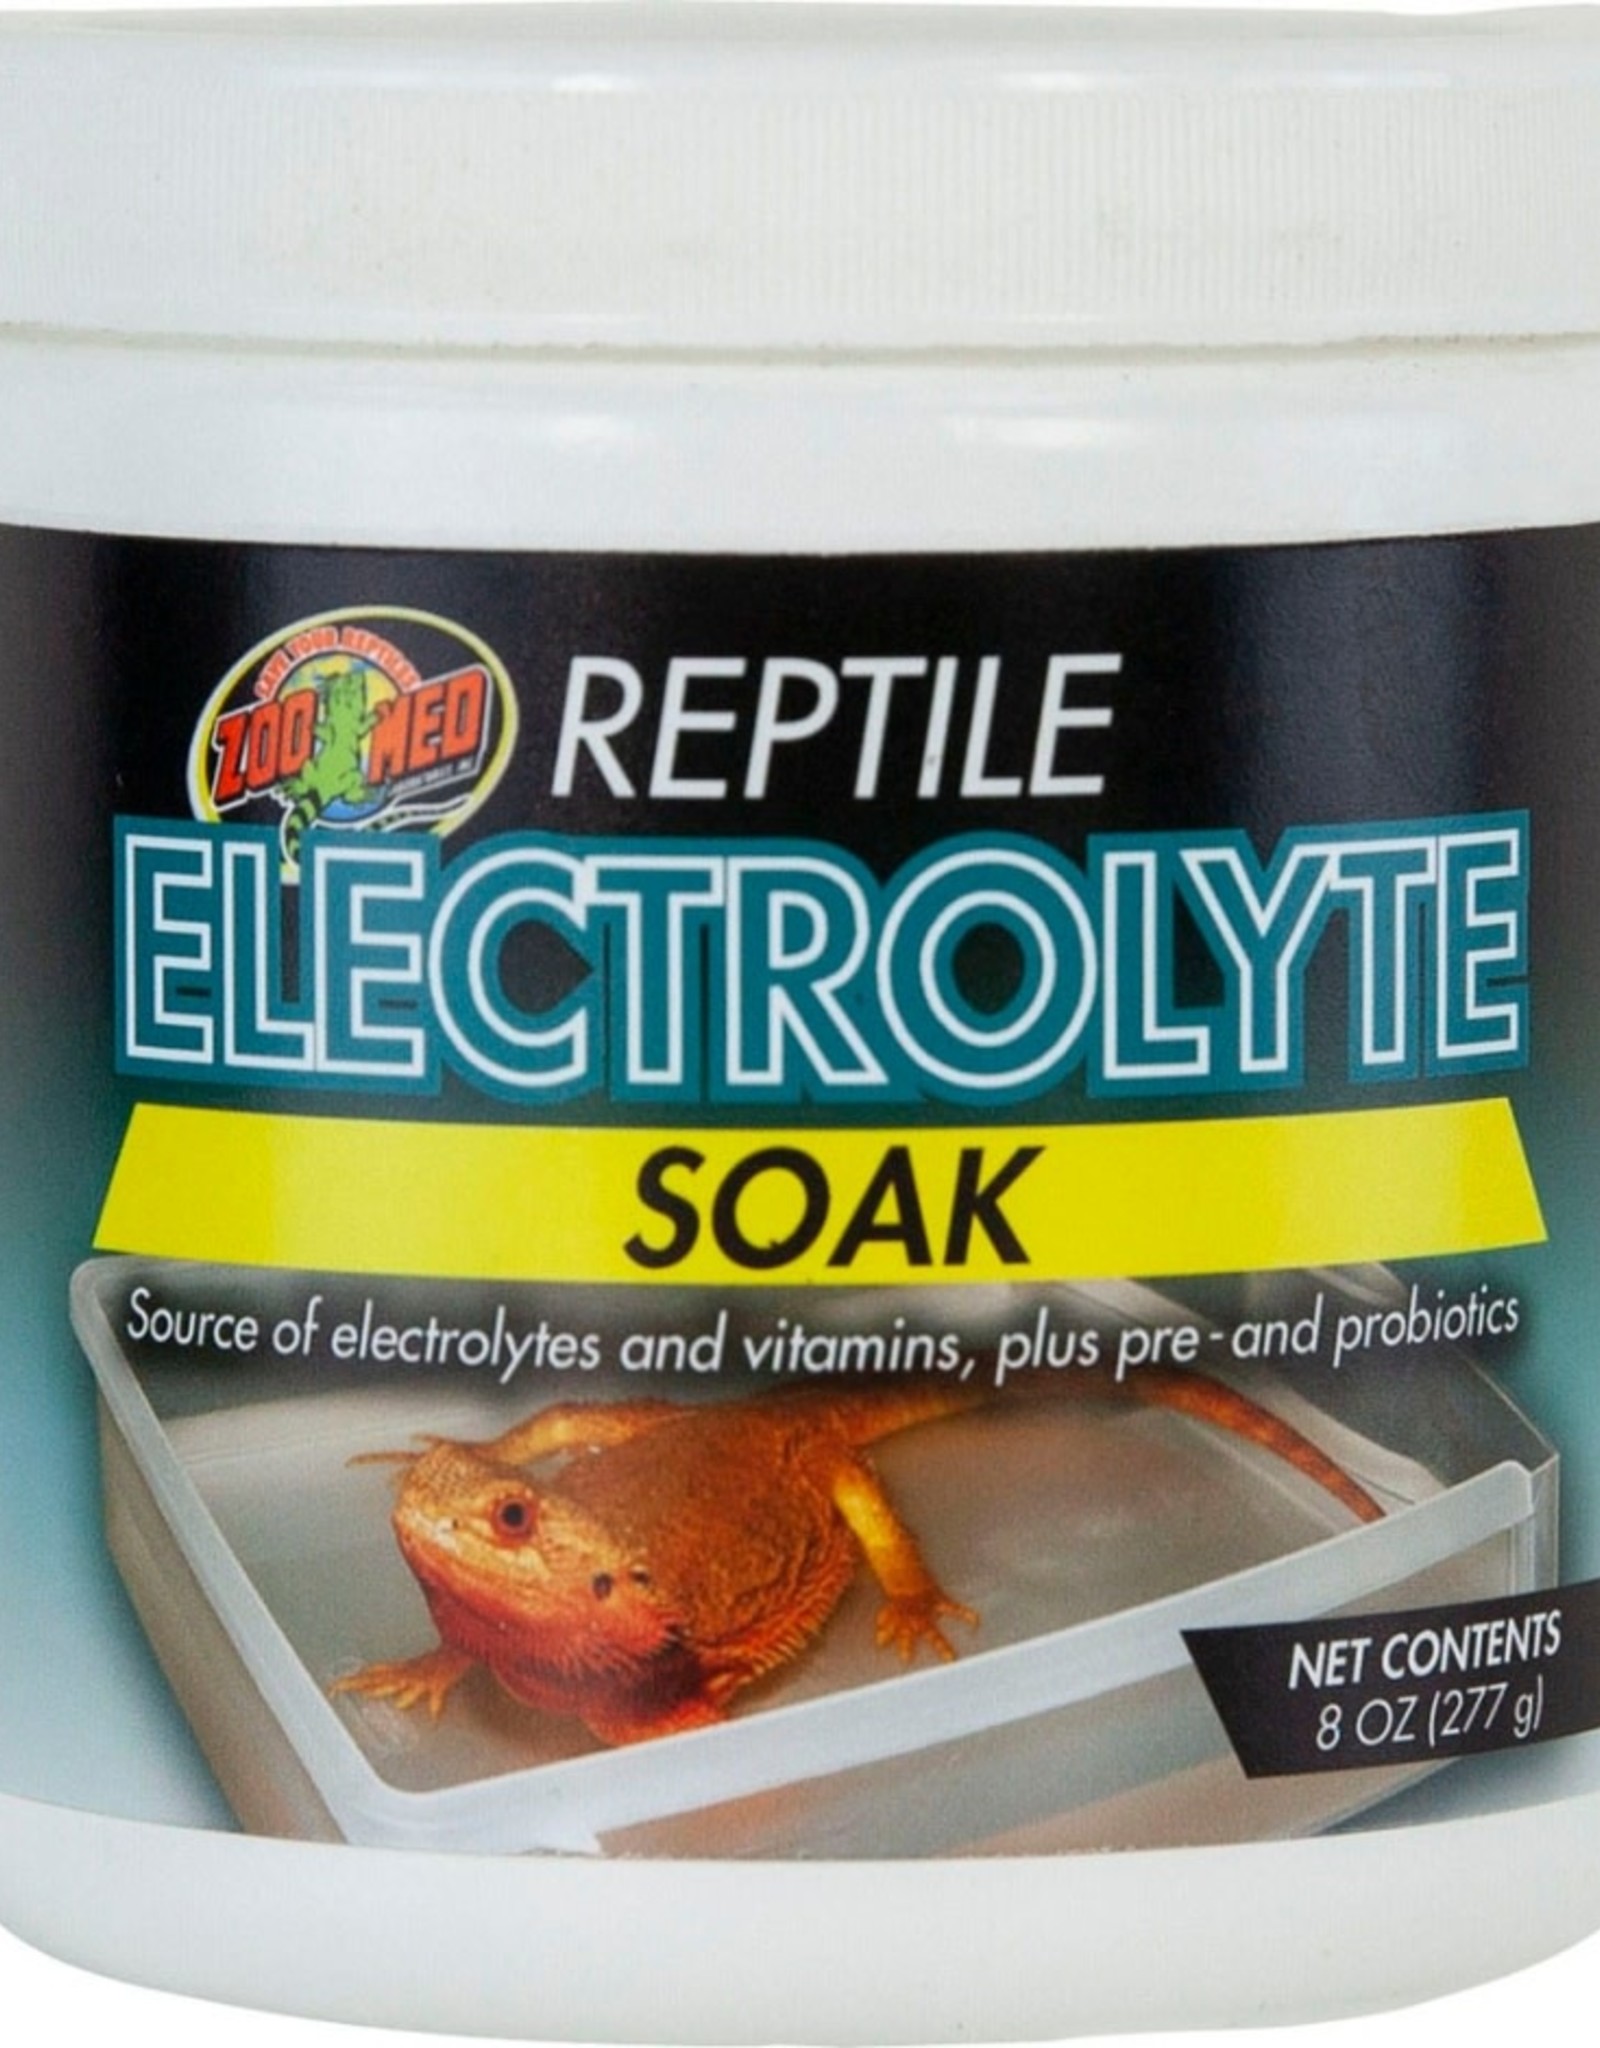 ZOO MED LABORATORIES, INC. ZOO MED- MD-22- REPTILE- ELECTROLYTE SOAK- 4X4X5- 16 OZ